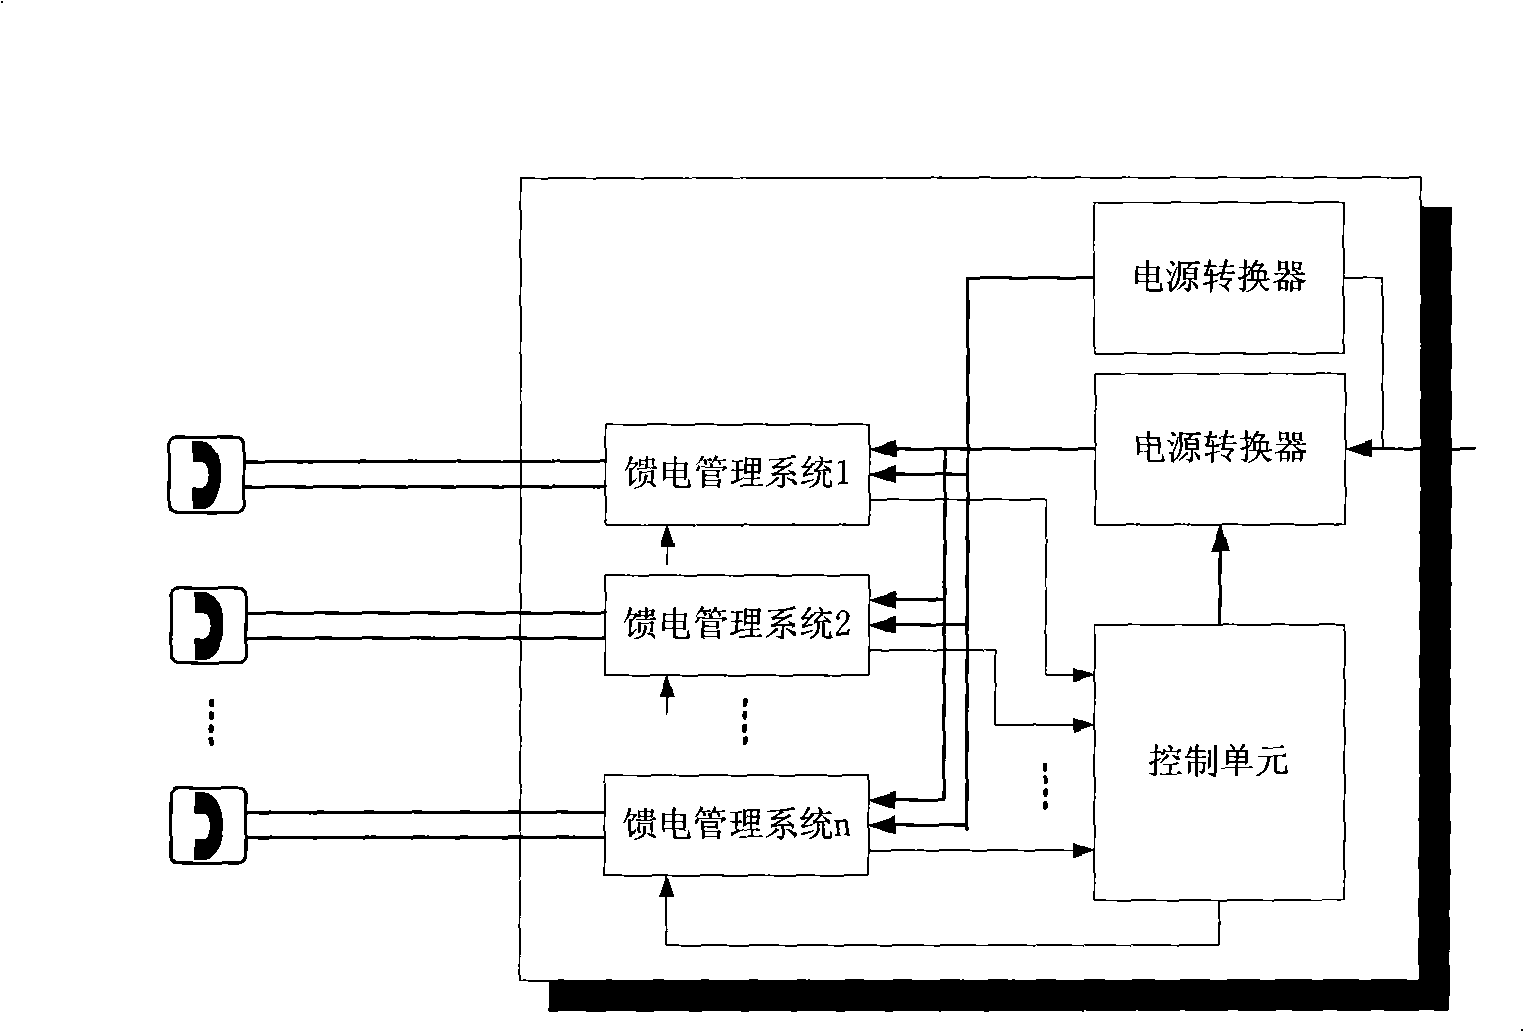 Feed method, system and equipment